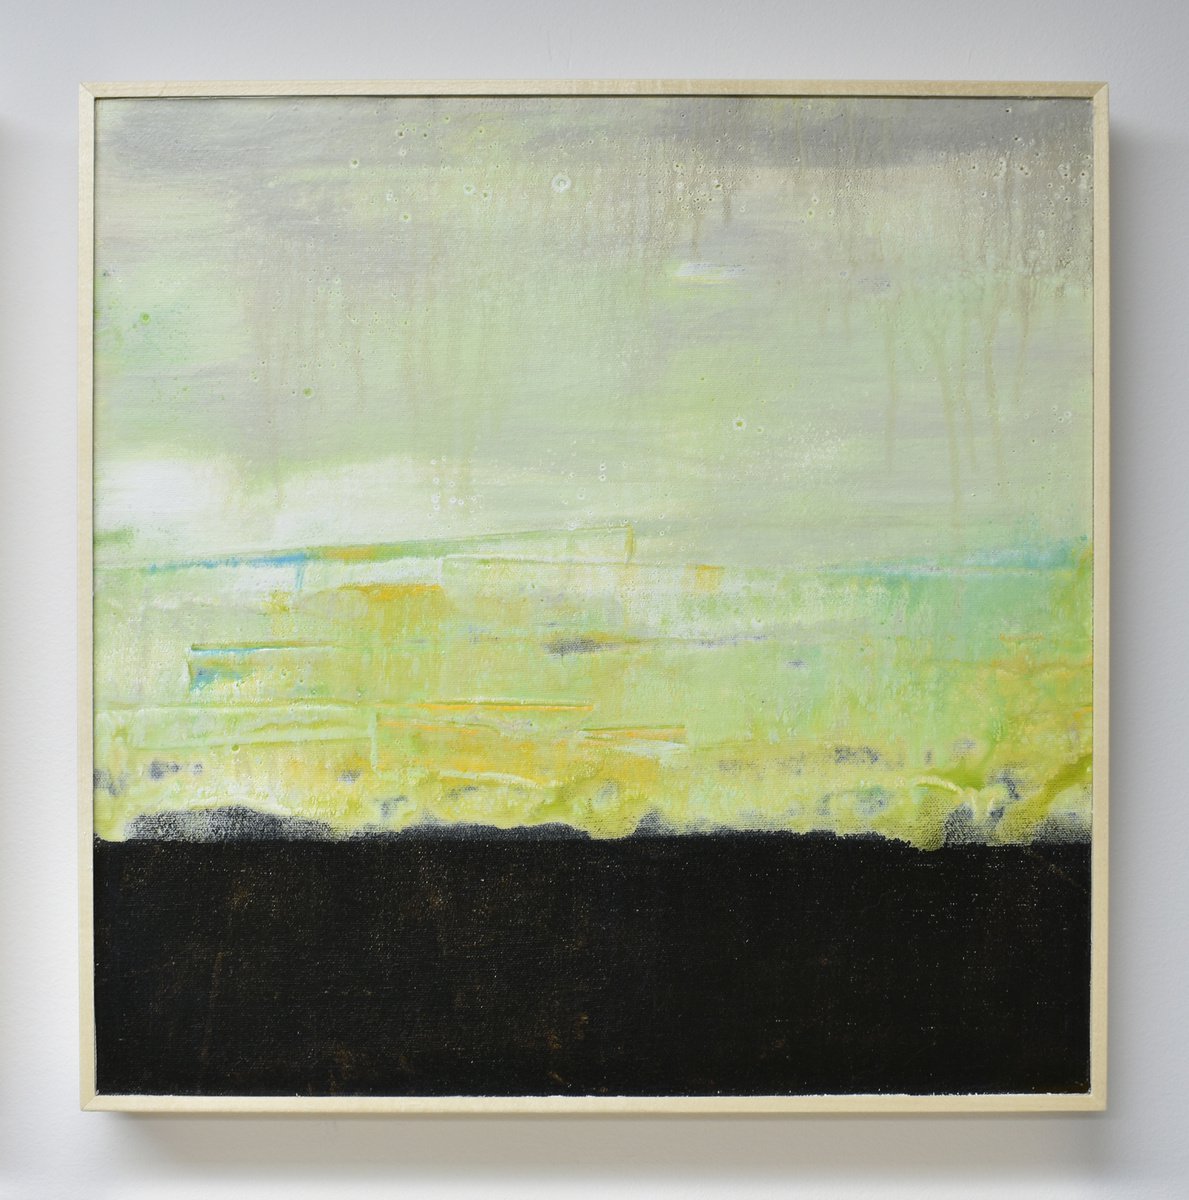 Terra 04, Featured Painting by Carney